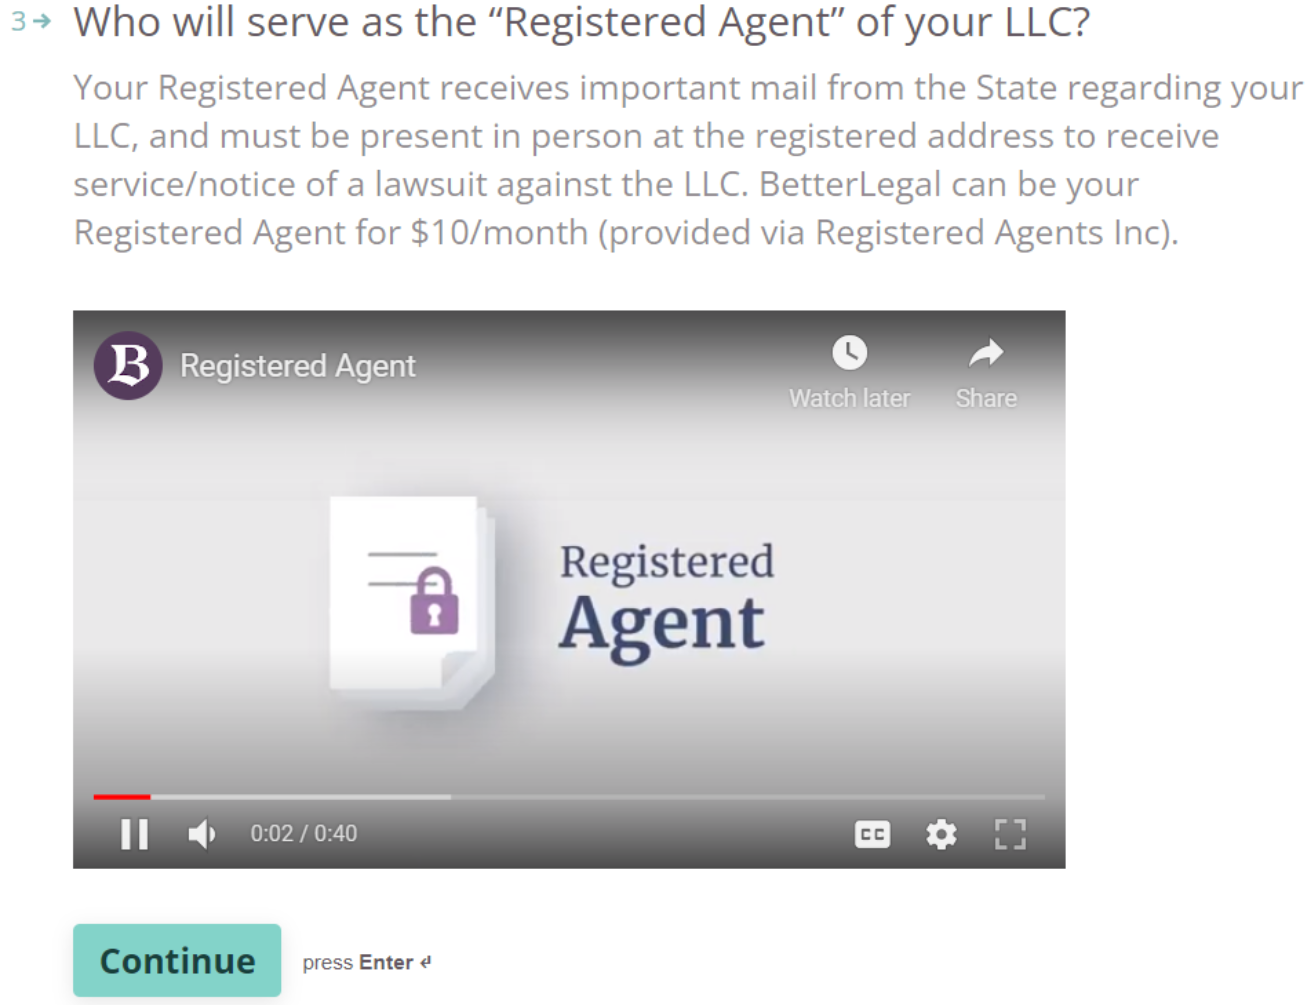 BetterLegal registered agent service guide and video